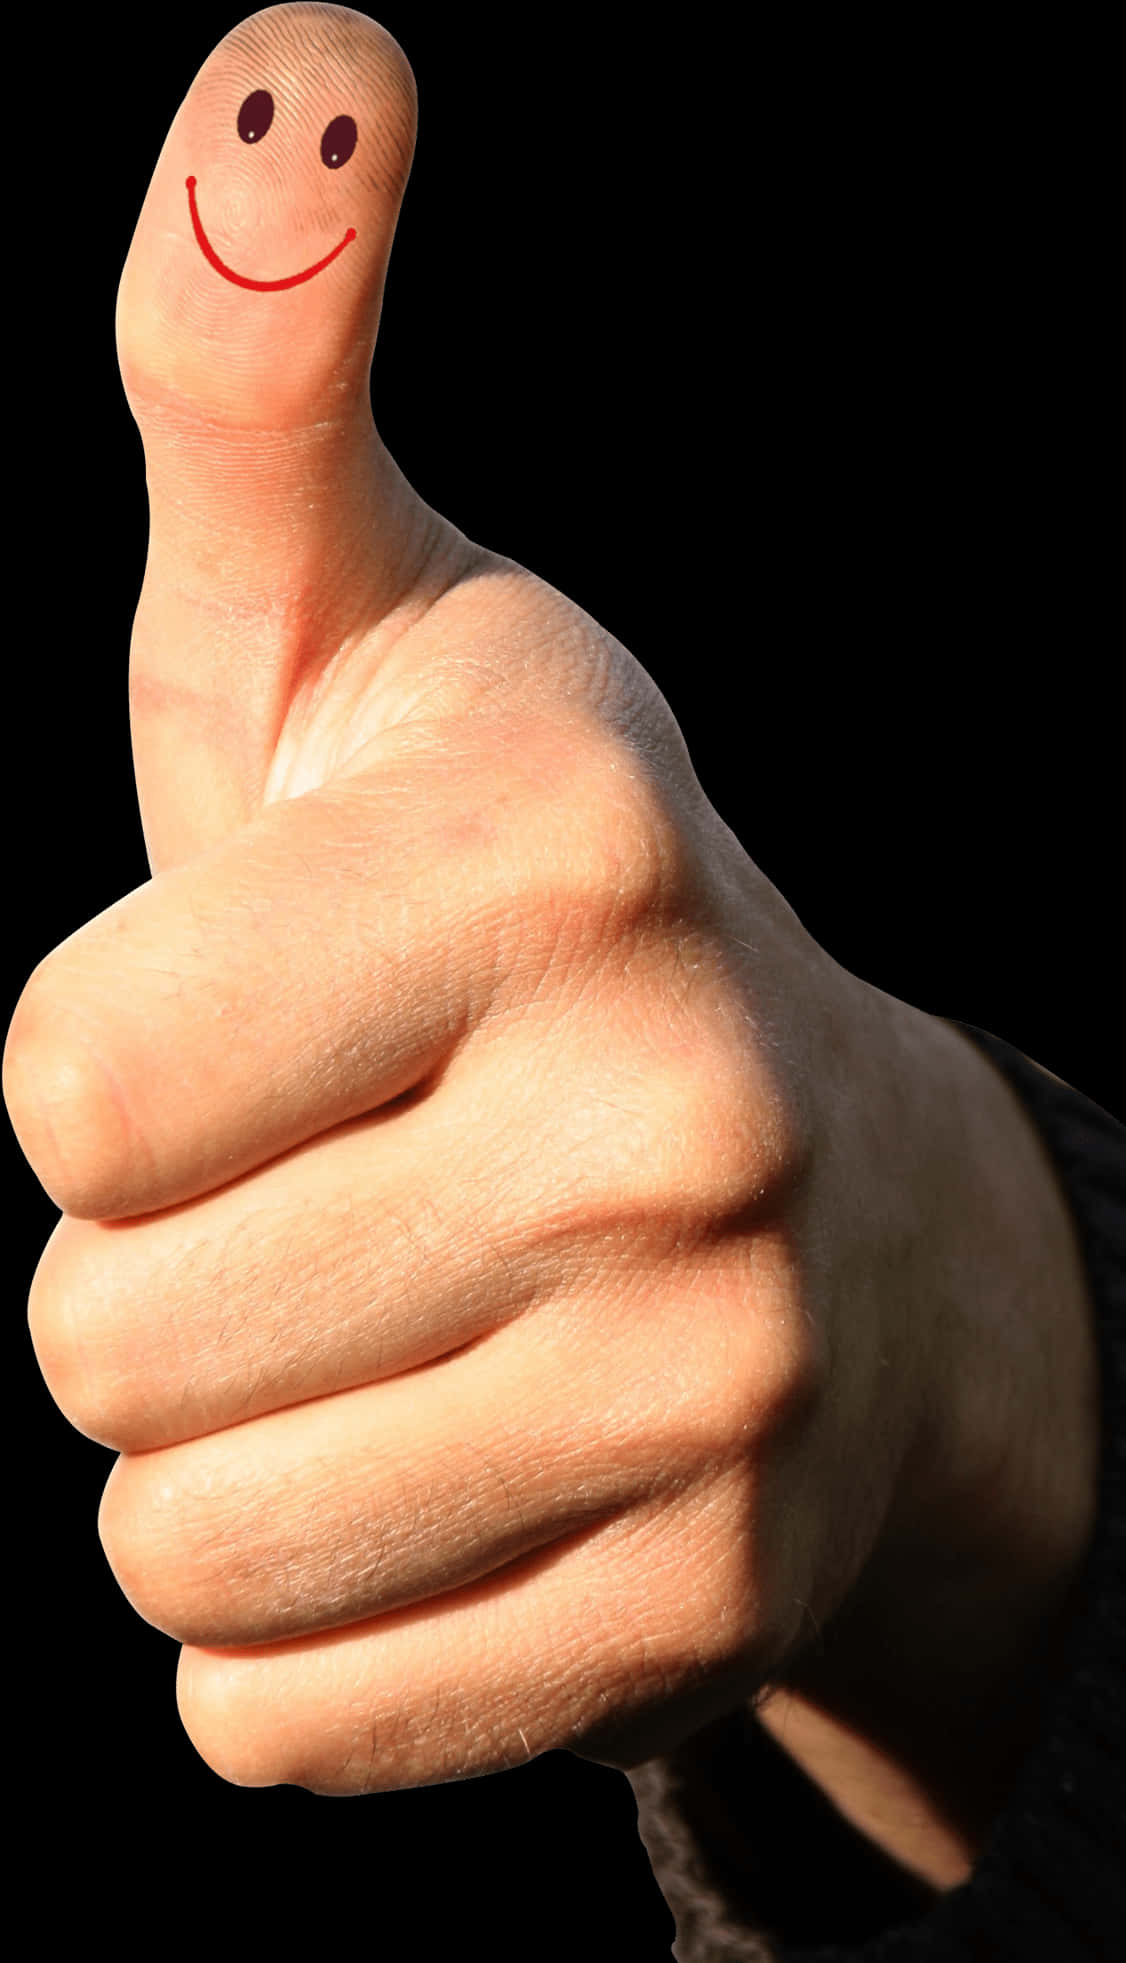 A Close-up Of A Hand Giving A Thumbs Up